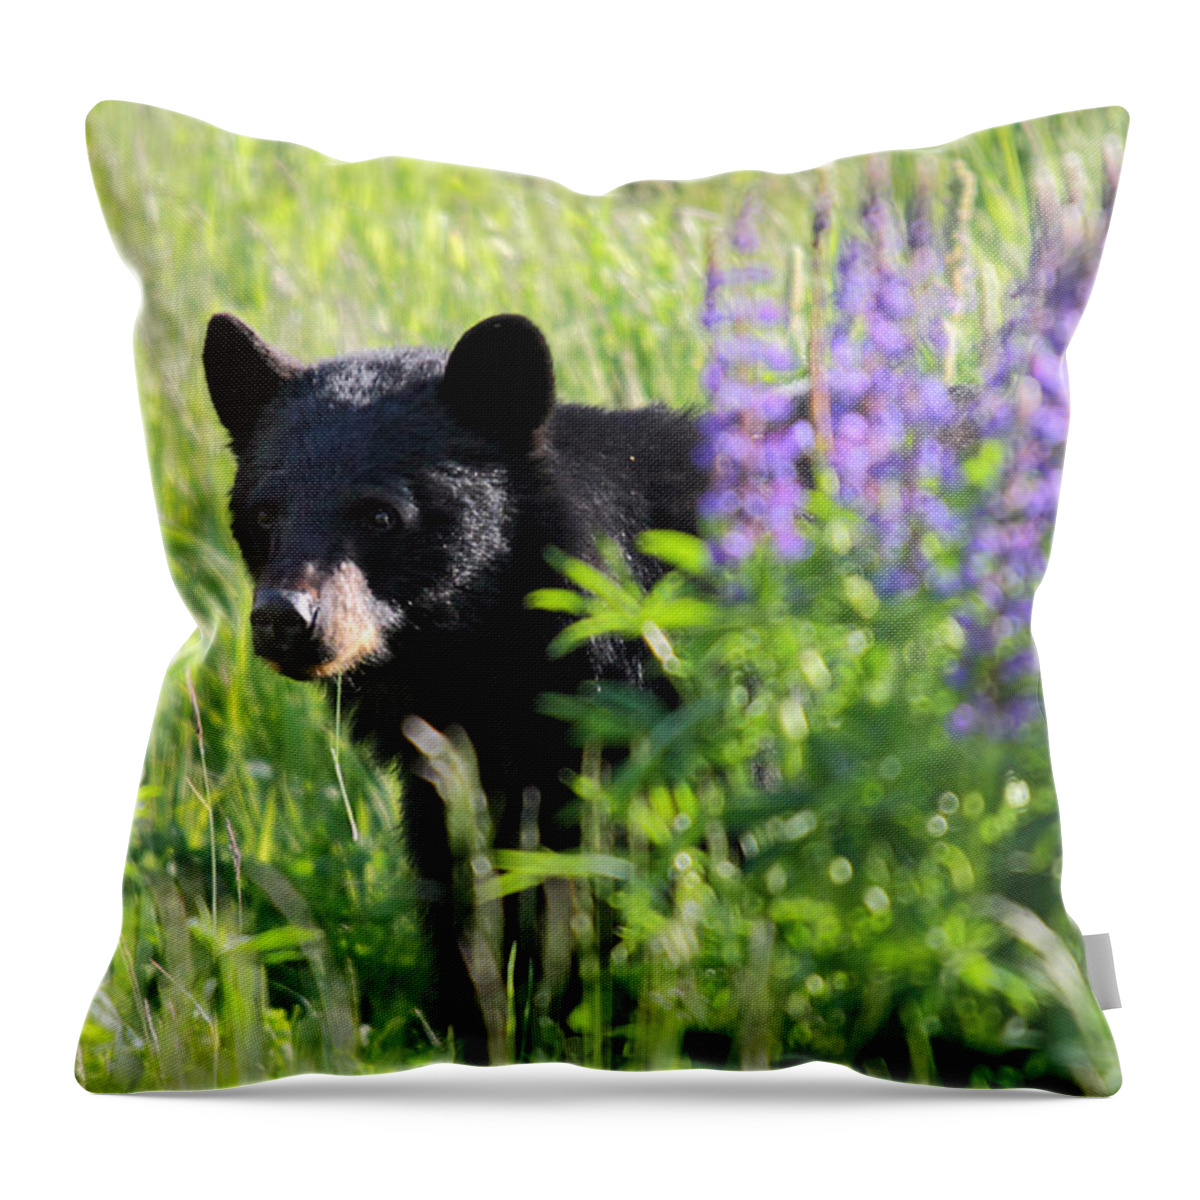 Black Throw Pillow featuring the photograph Black bear hiding behind lupines by Pierre Leclerc Photography